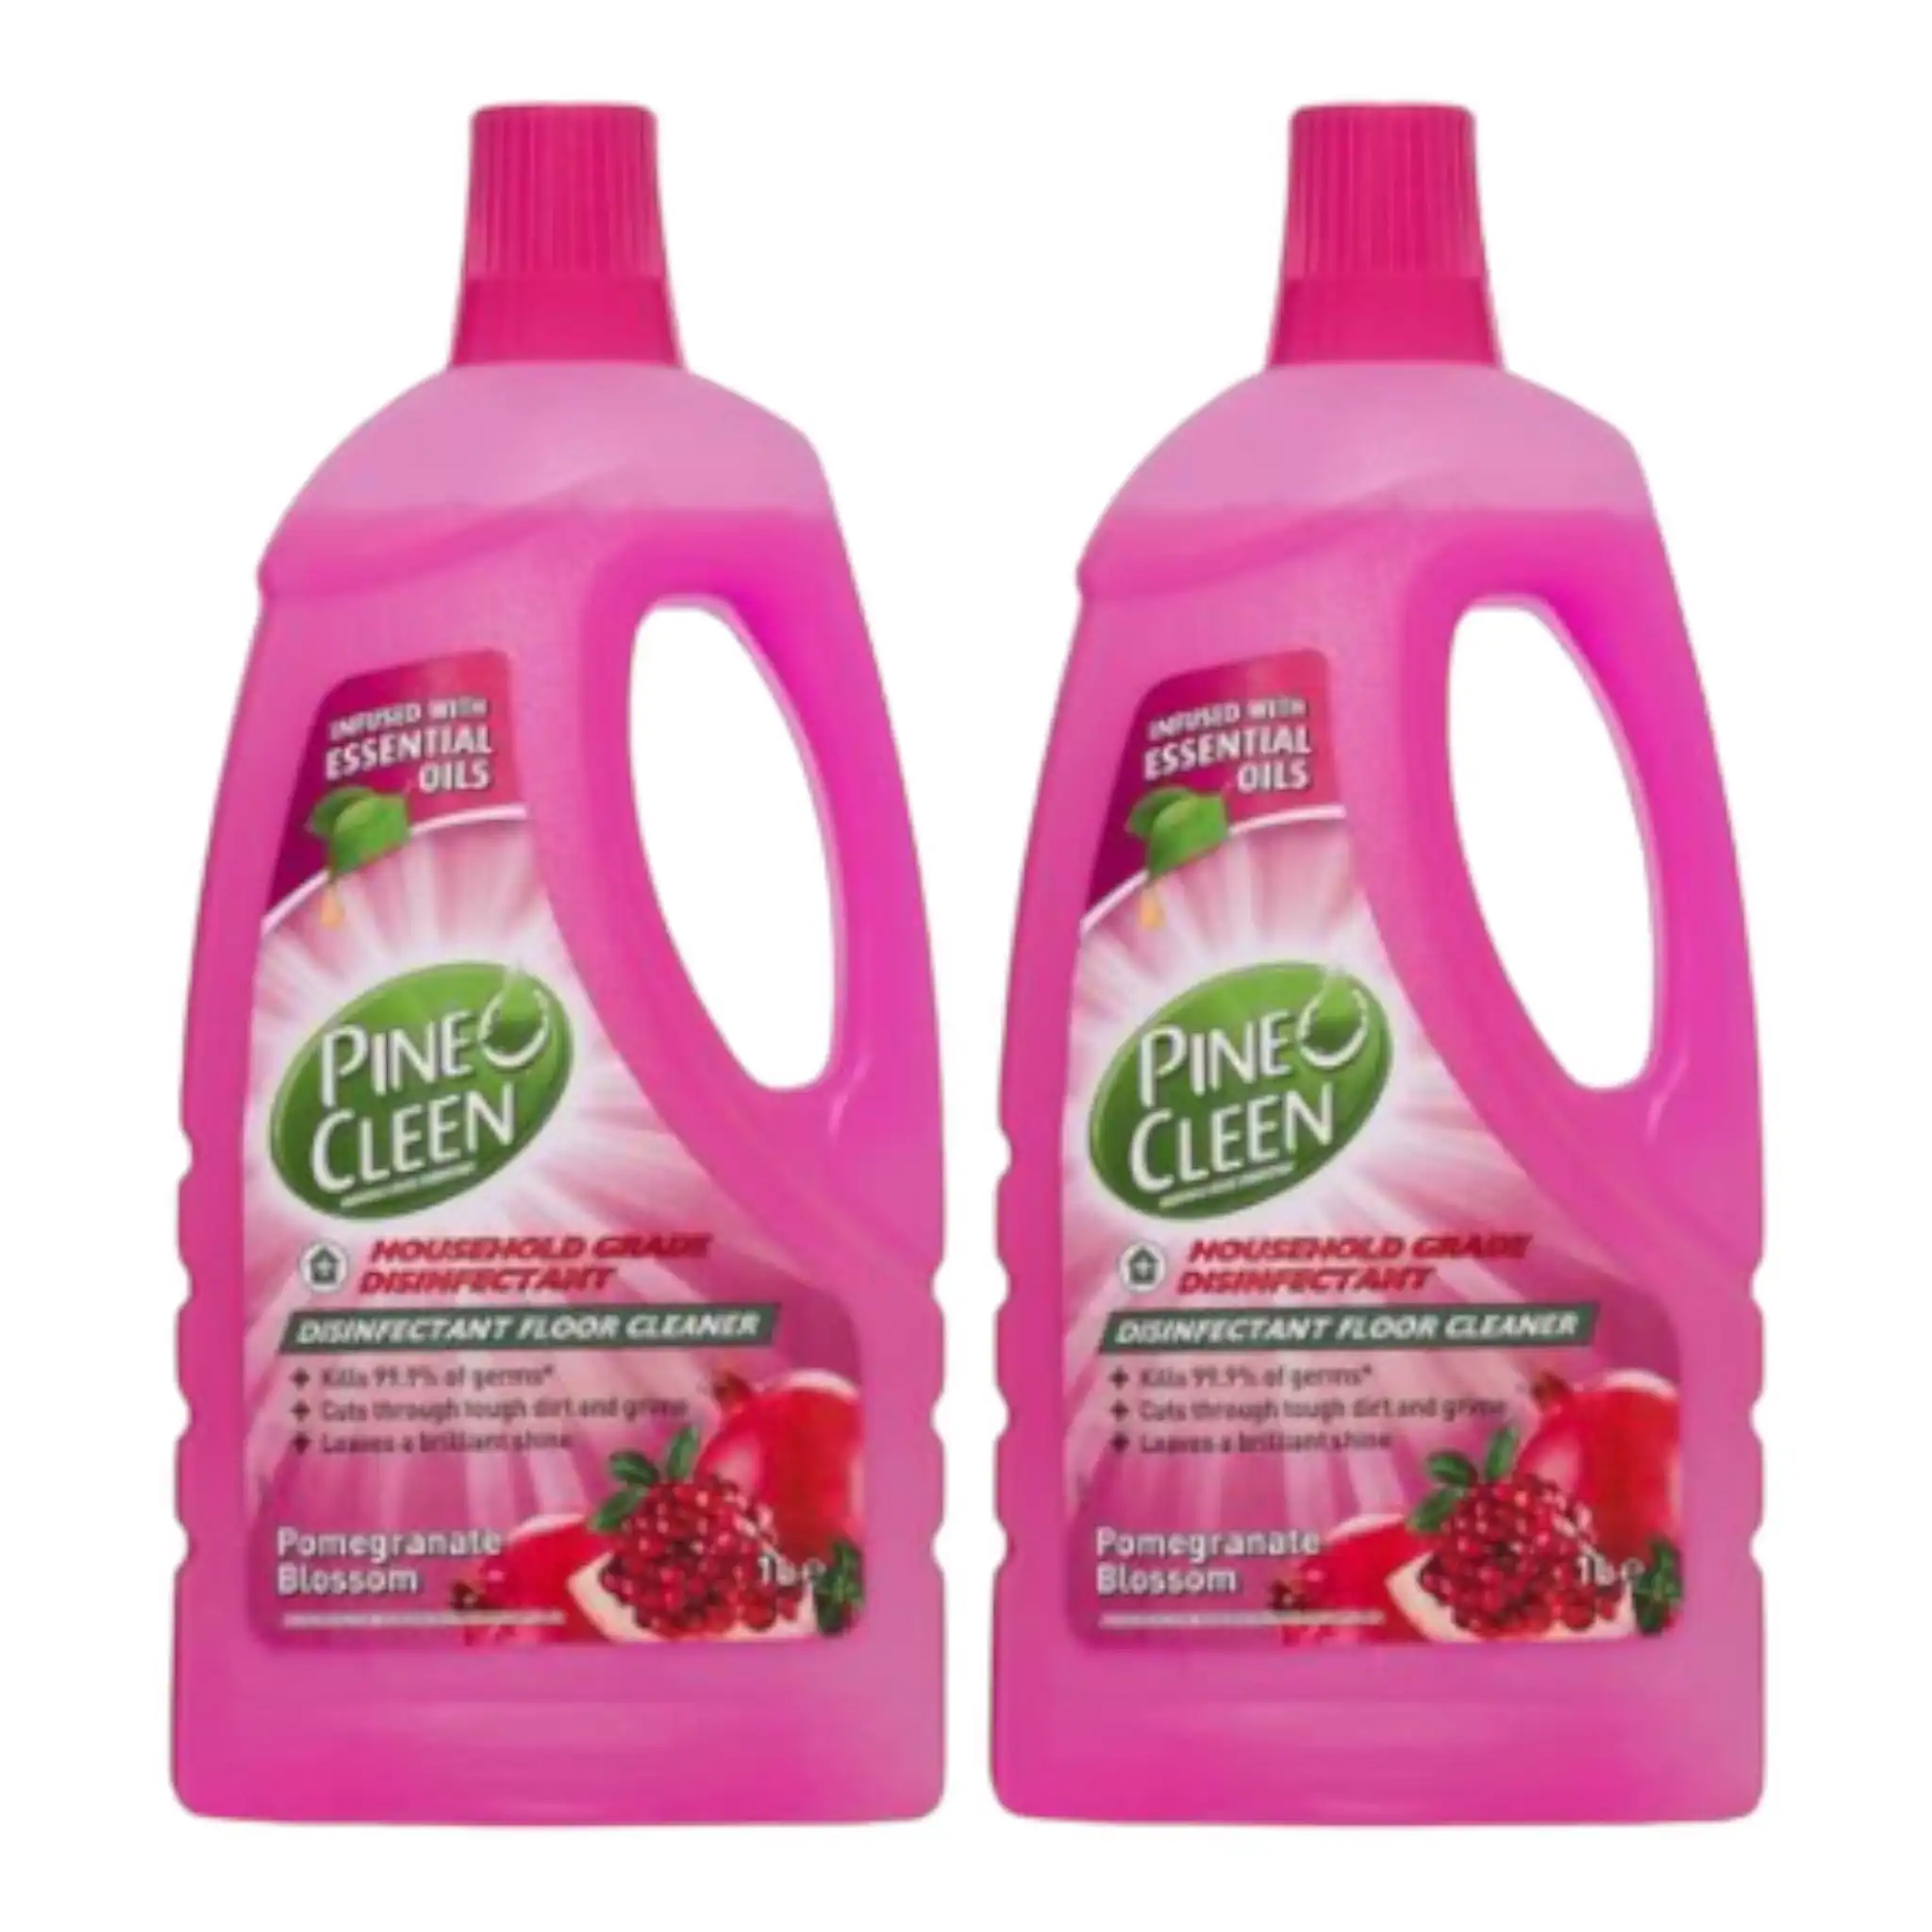 2 Pack Pine O Cleen Disinfectant Floor Cleaner Pomegranate 1l